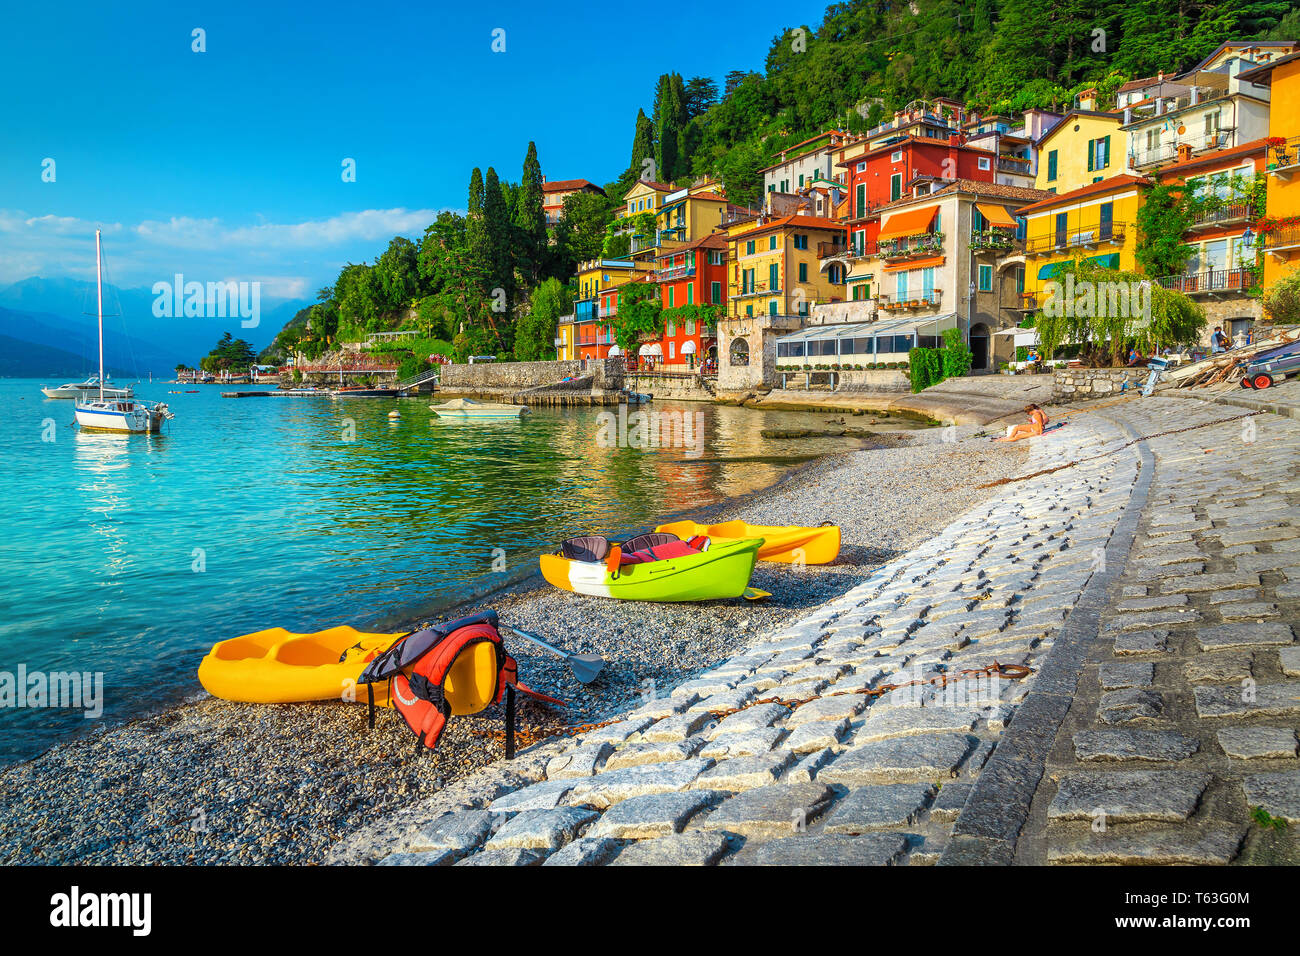 Famous travel and tourism location with colorful buildings. Summer holiday resort with colorful canoes, kayaks and boats, Varenna, lake Como, Italy, E Stock Photo